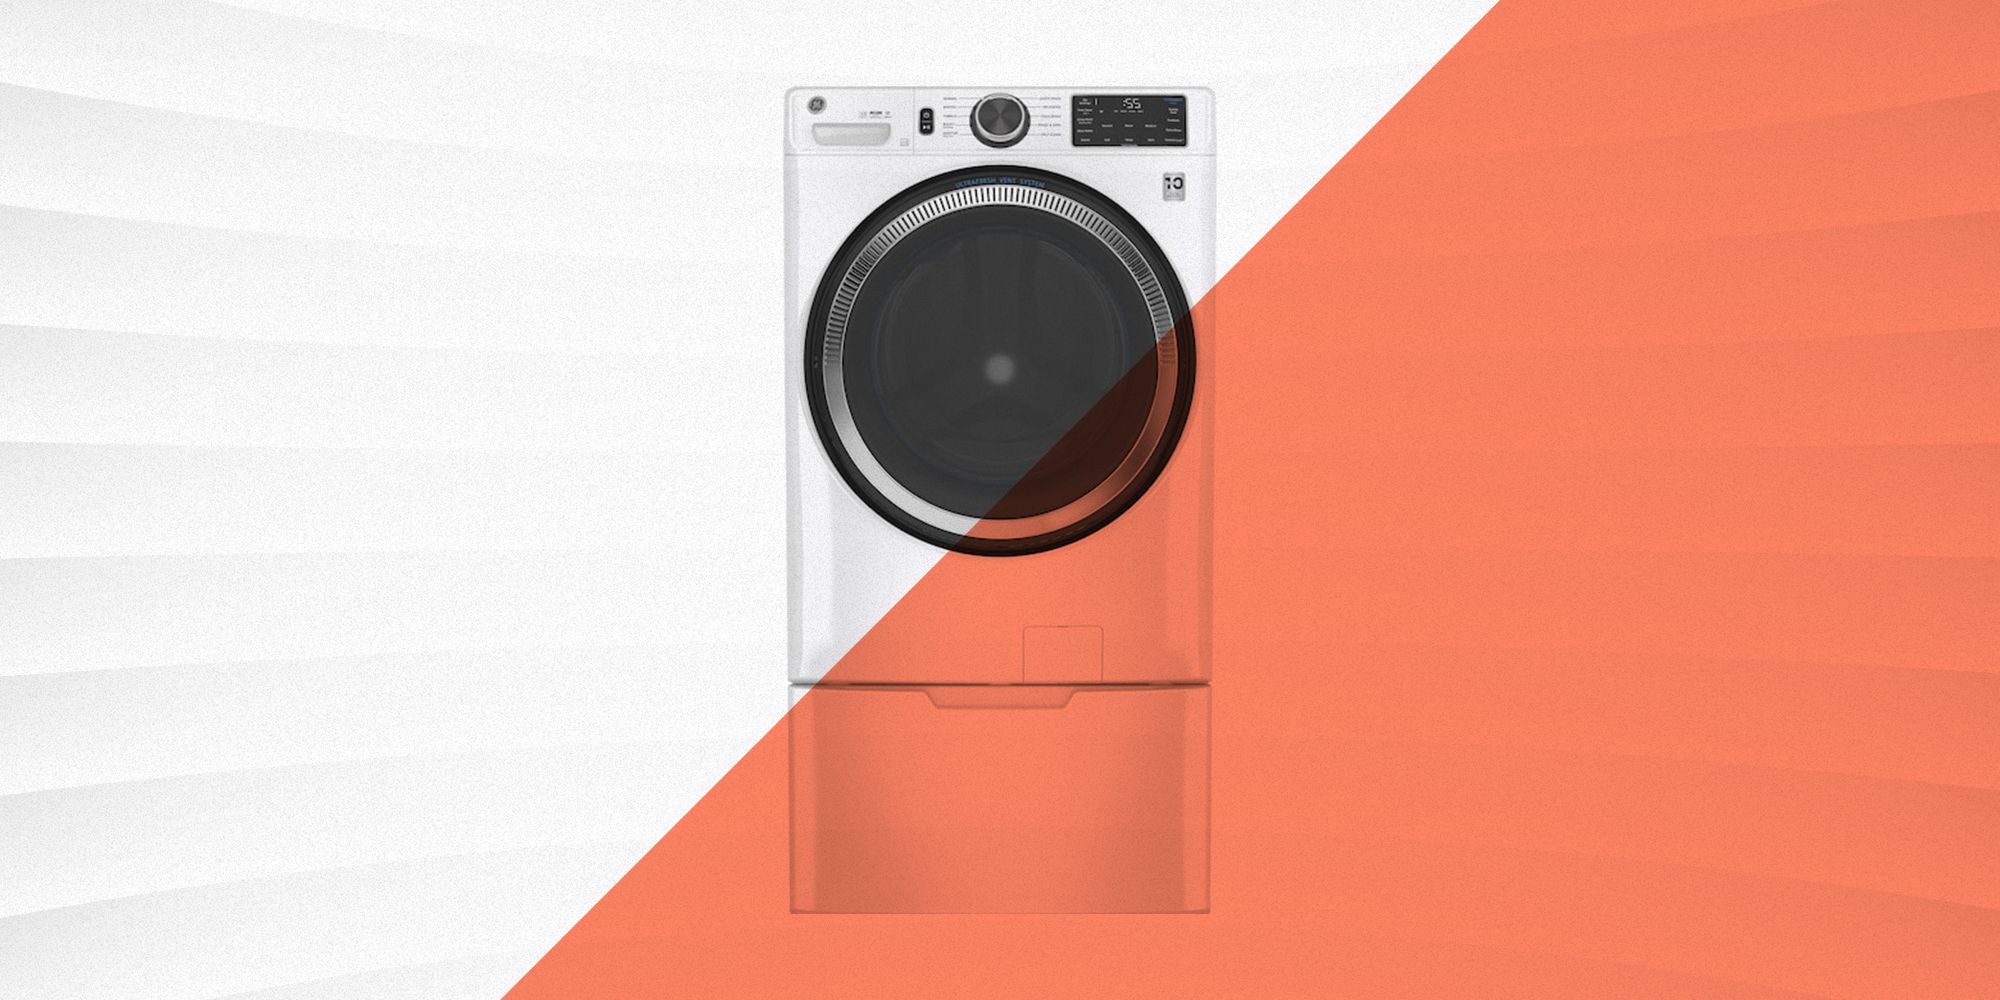 What To Do When Your Washing Machine Won't Spin Or Drain? – Forbes Home